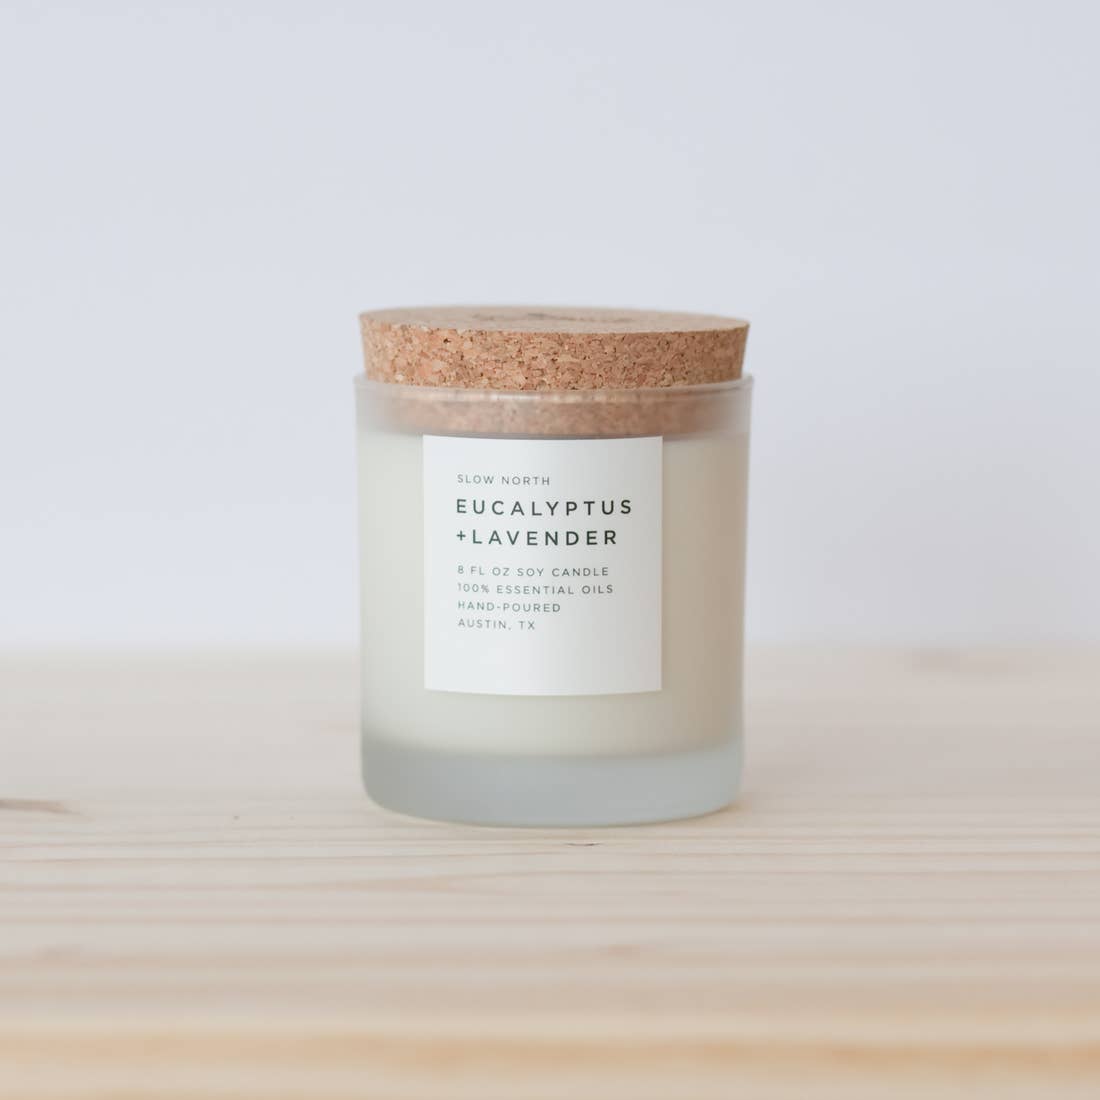 Eucalyptus + Lavender Frosted Candle | Slow North